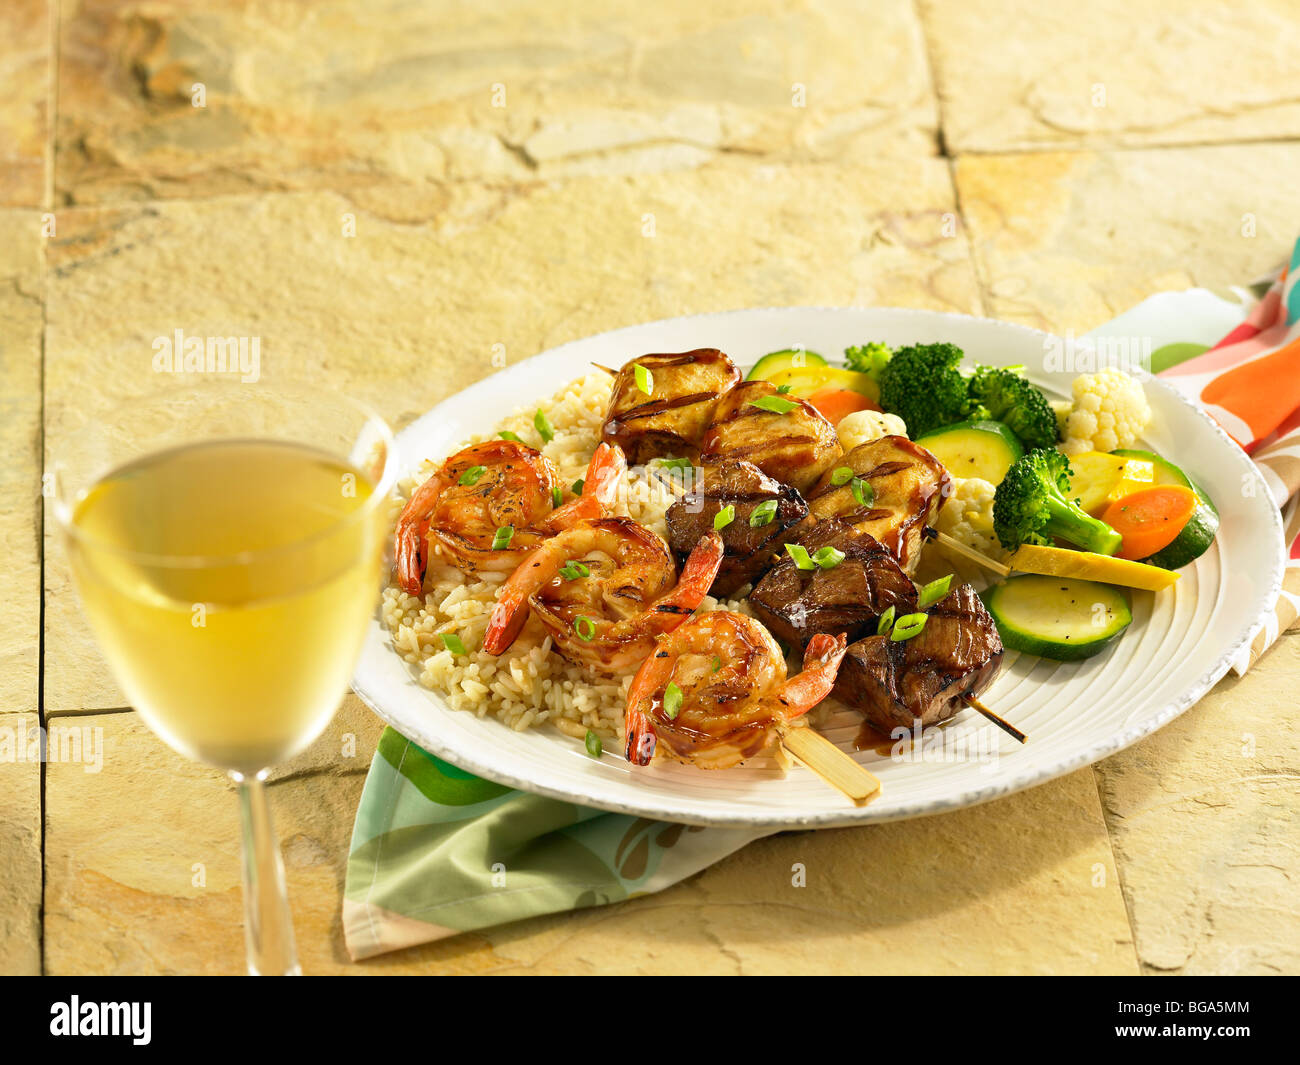 Shrimp, beef and chicken skewers with mixed vegetable on rice Stock Photo